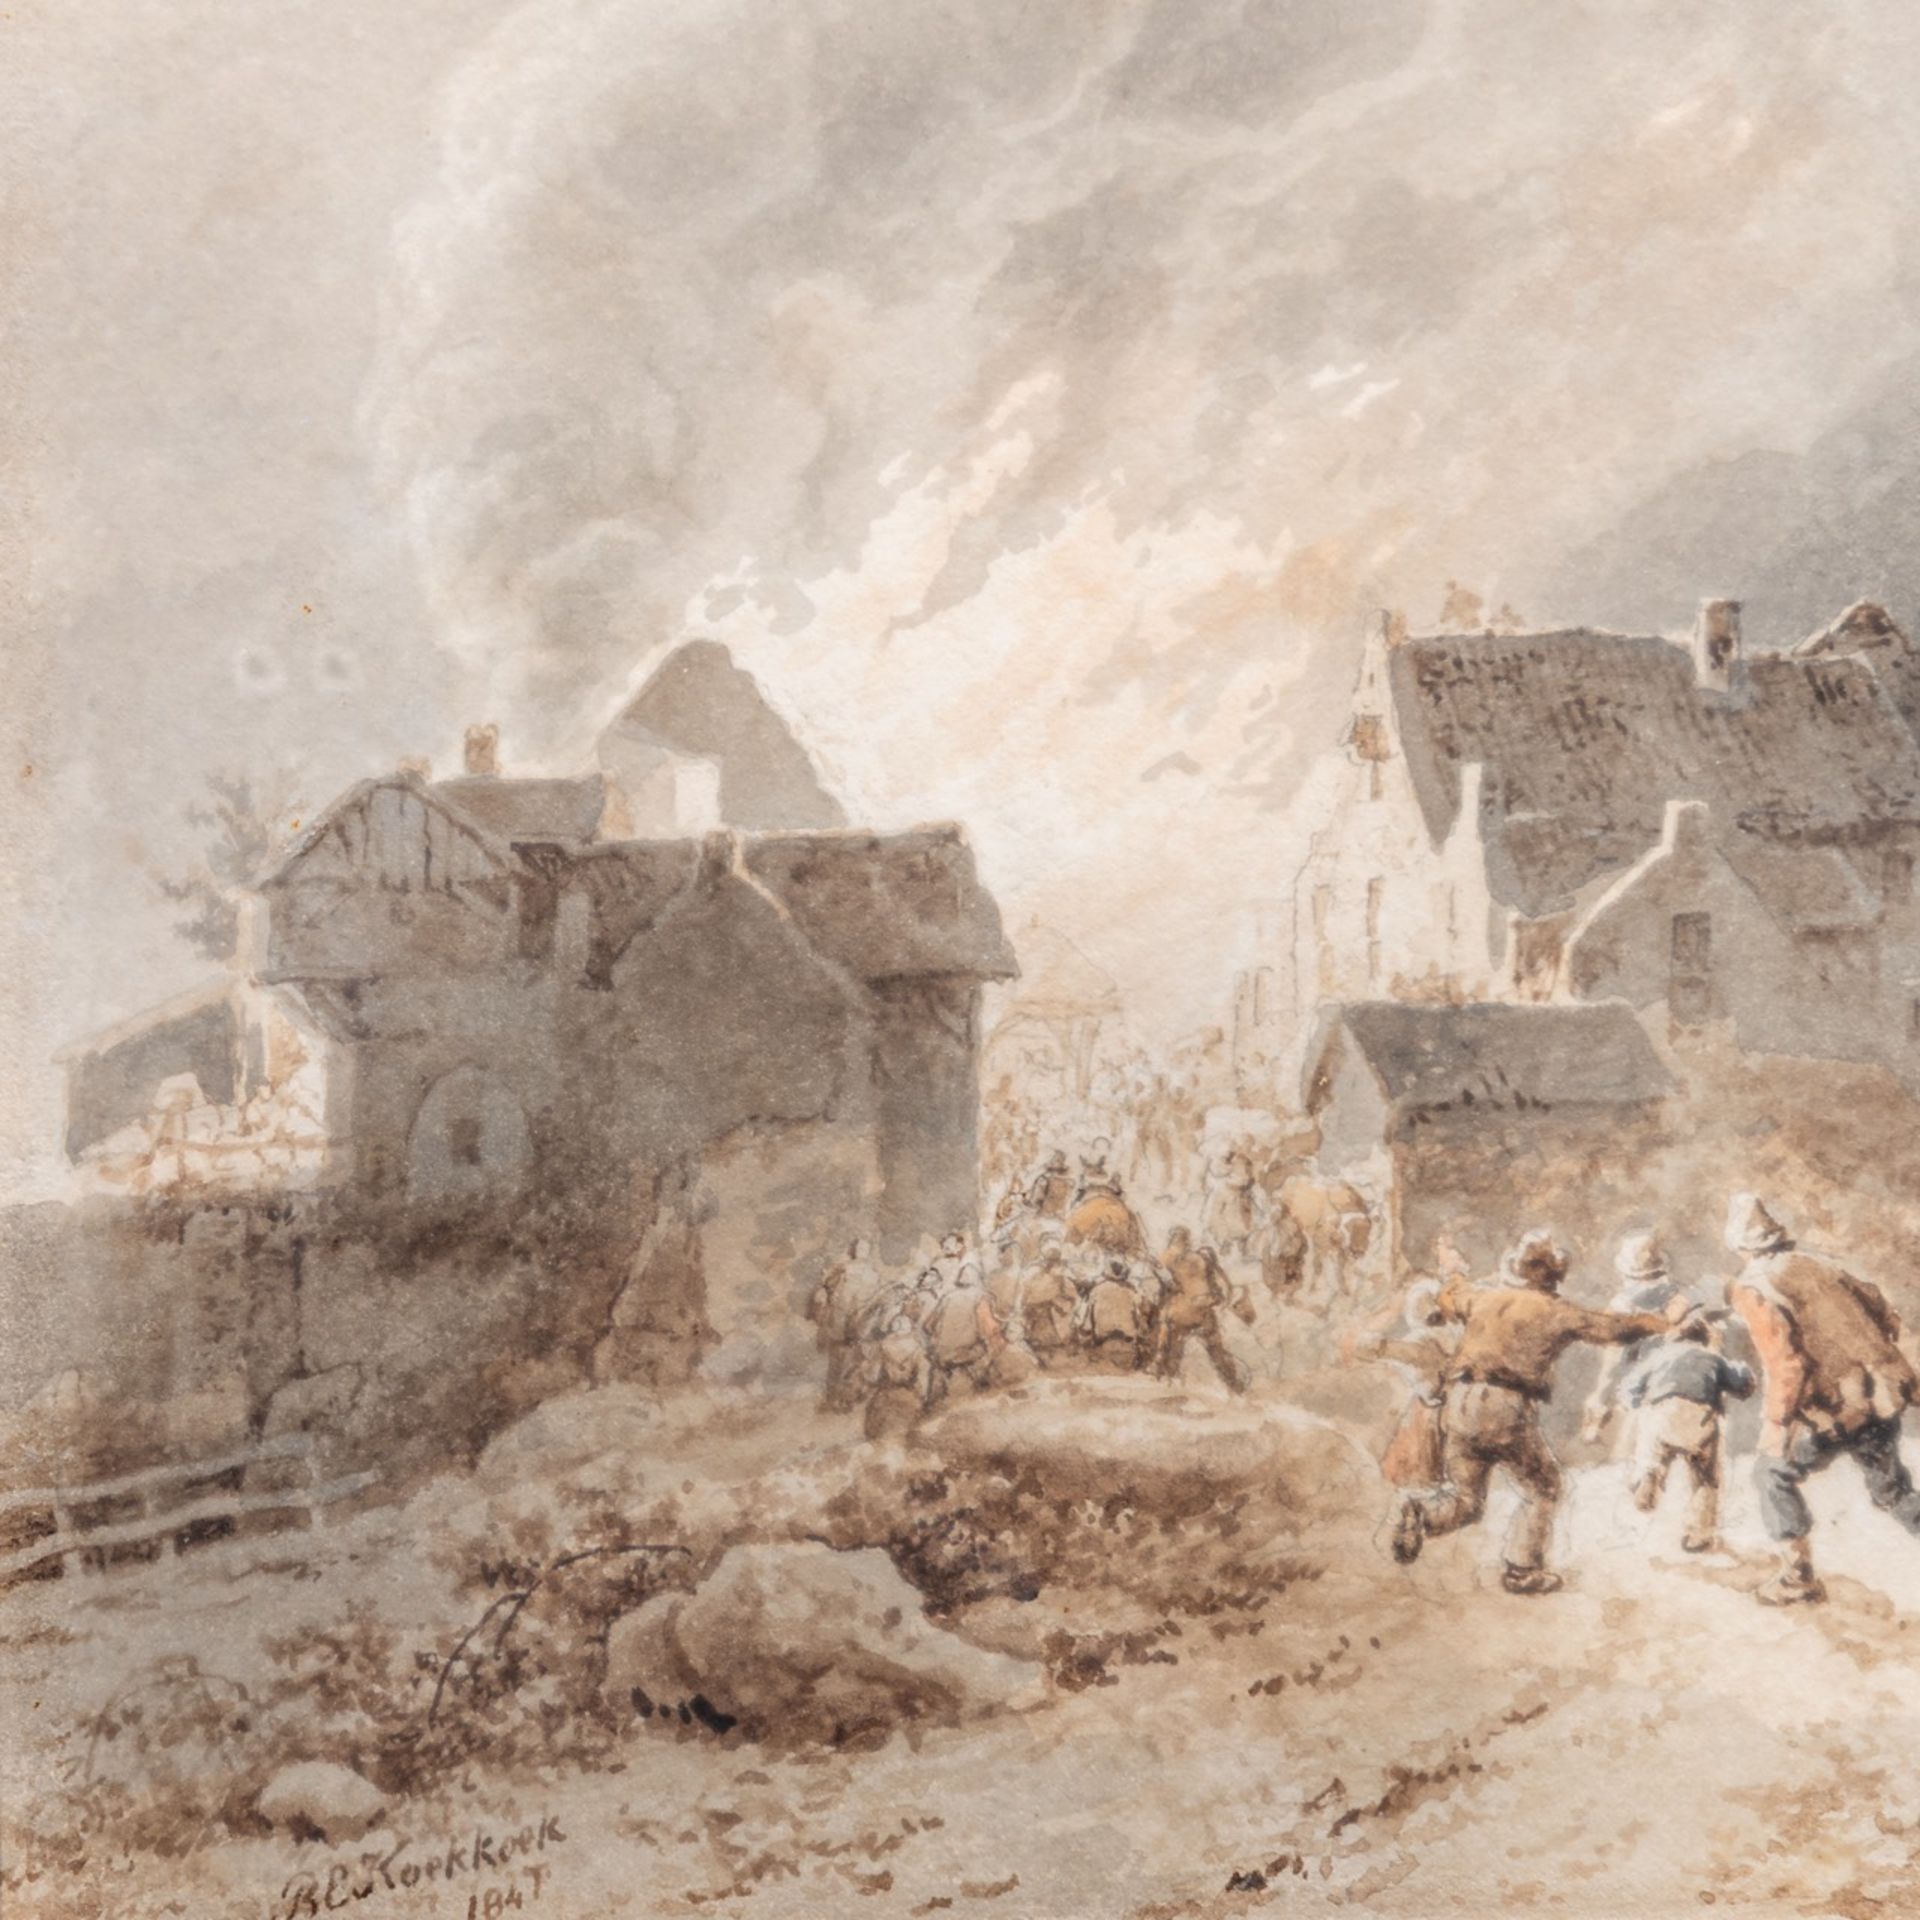 Barend Cornelis Koekoek (1803-1862), a rural village shocked by a fire, 1847, watercolour and pencil - Image 5 of 6